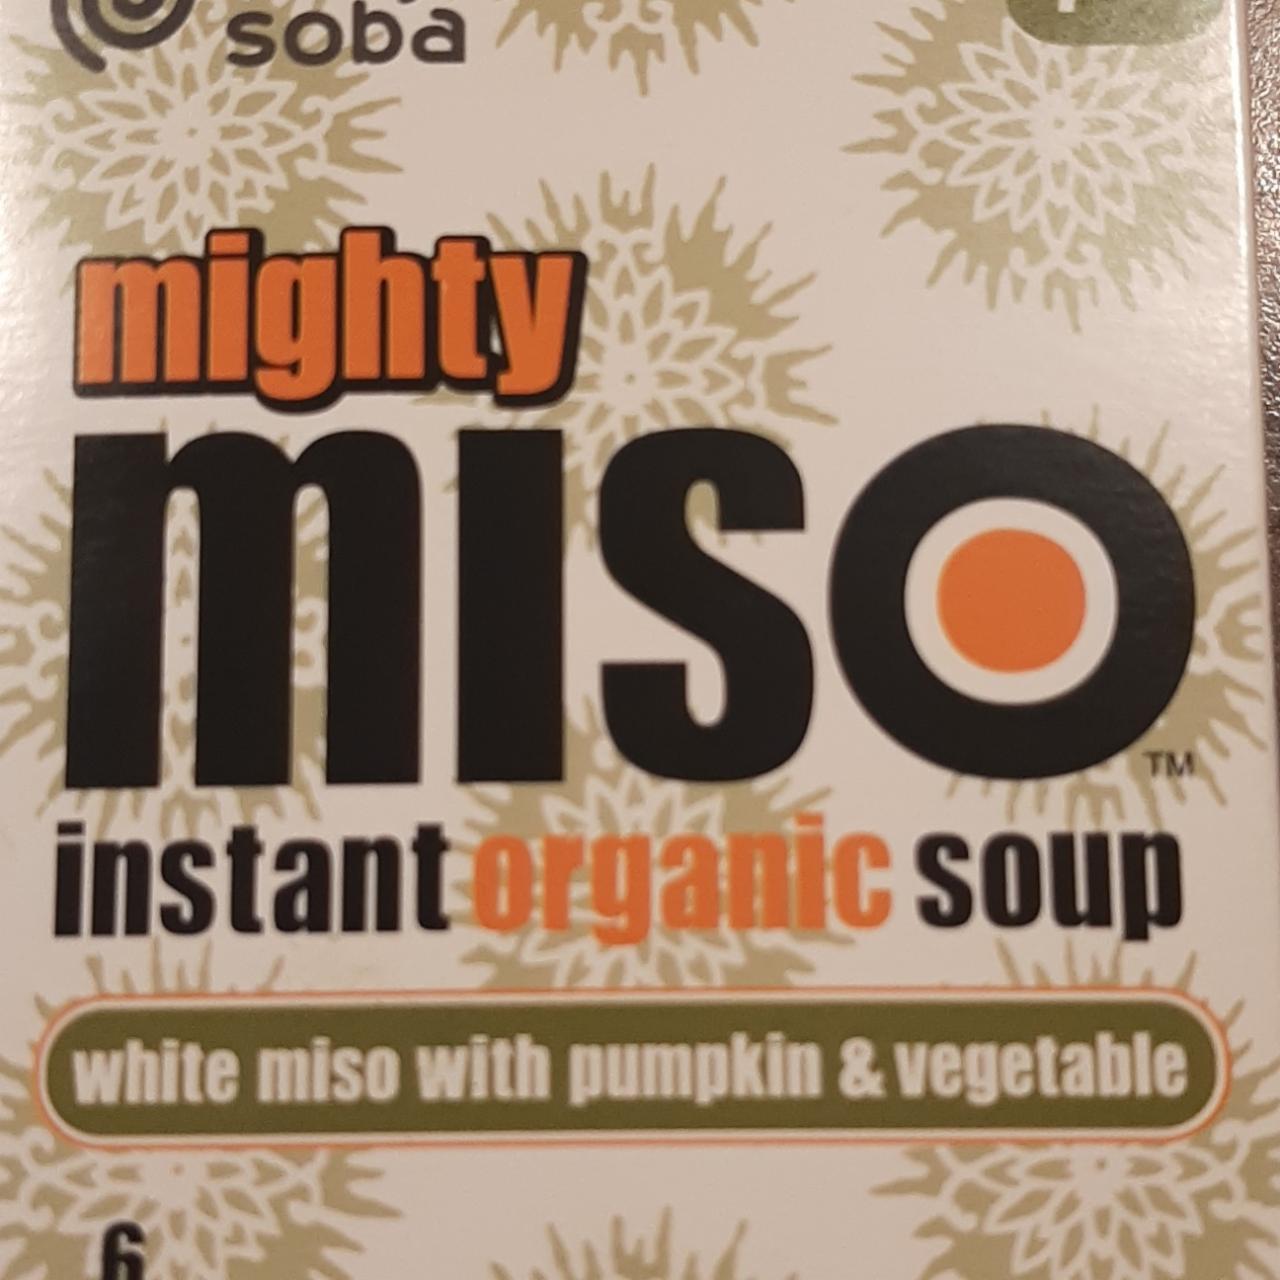 Fotografie - Mighty Miso instant organic soup with pumpkin & vegetable King Soba